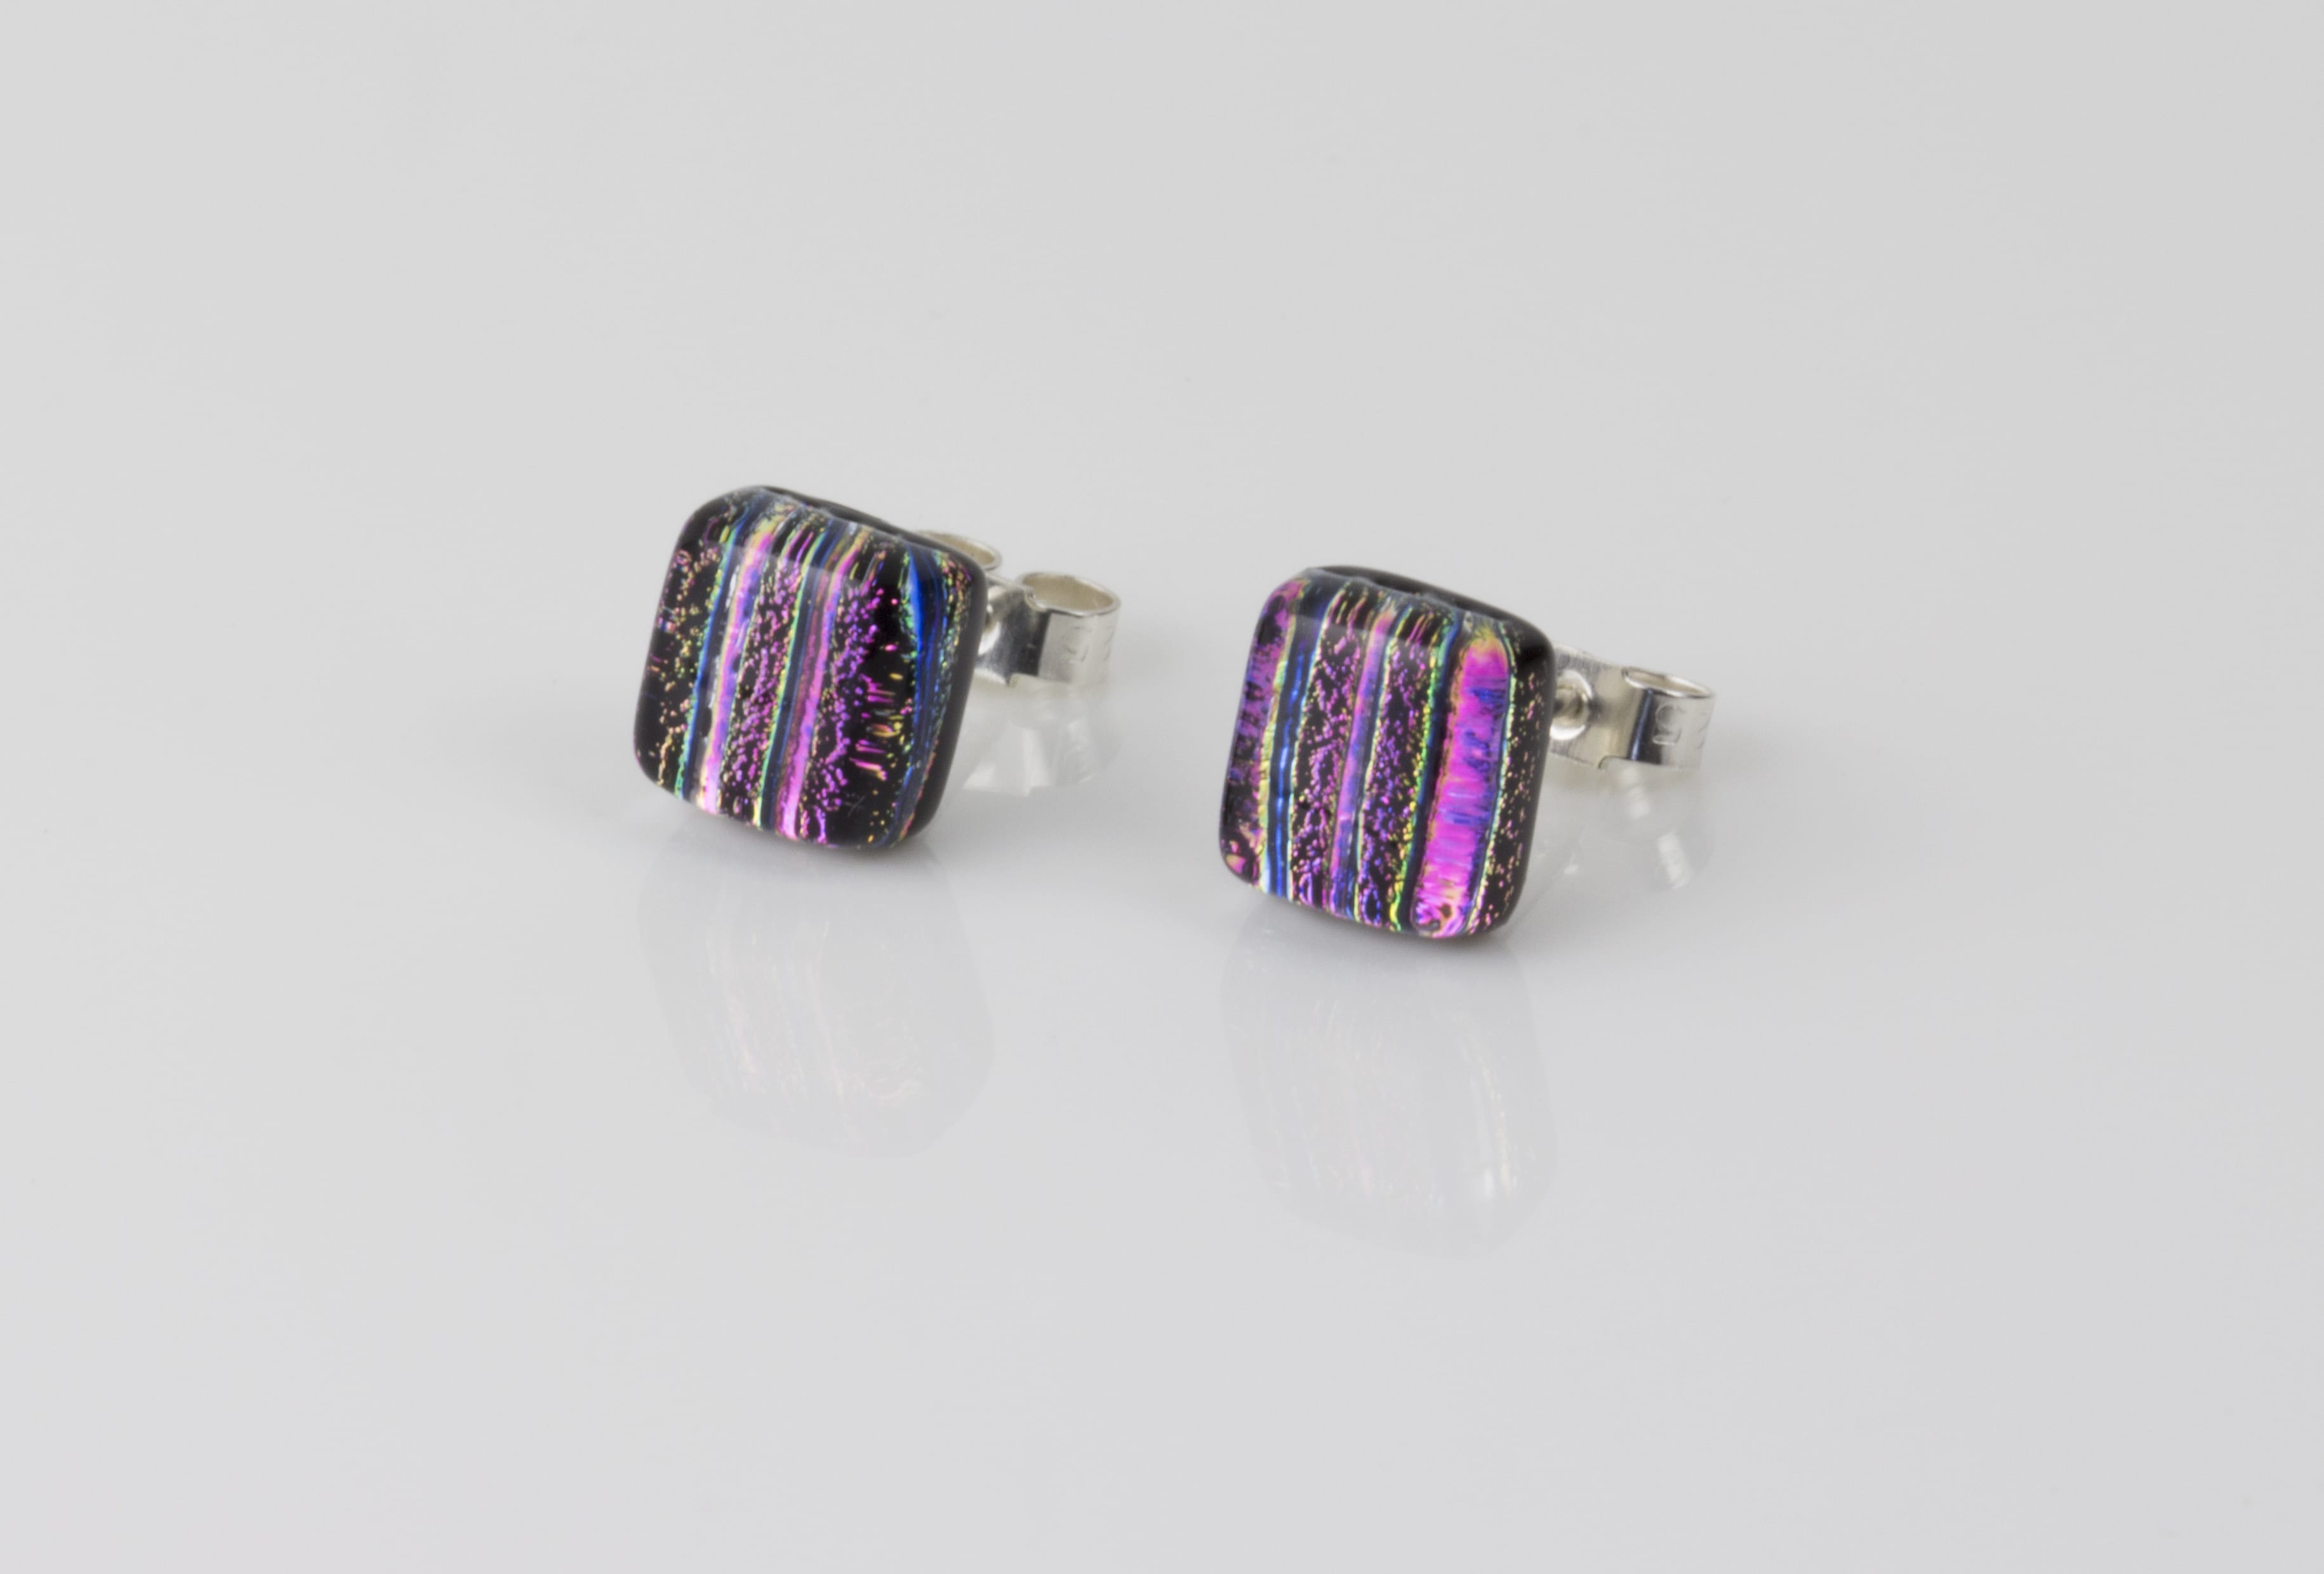 Dichroic glass jewellery uk, handmade stud earrings with striped pink, yellow, black, blue. Square, glass 8-10mm, sterling silver